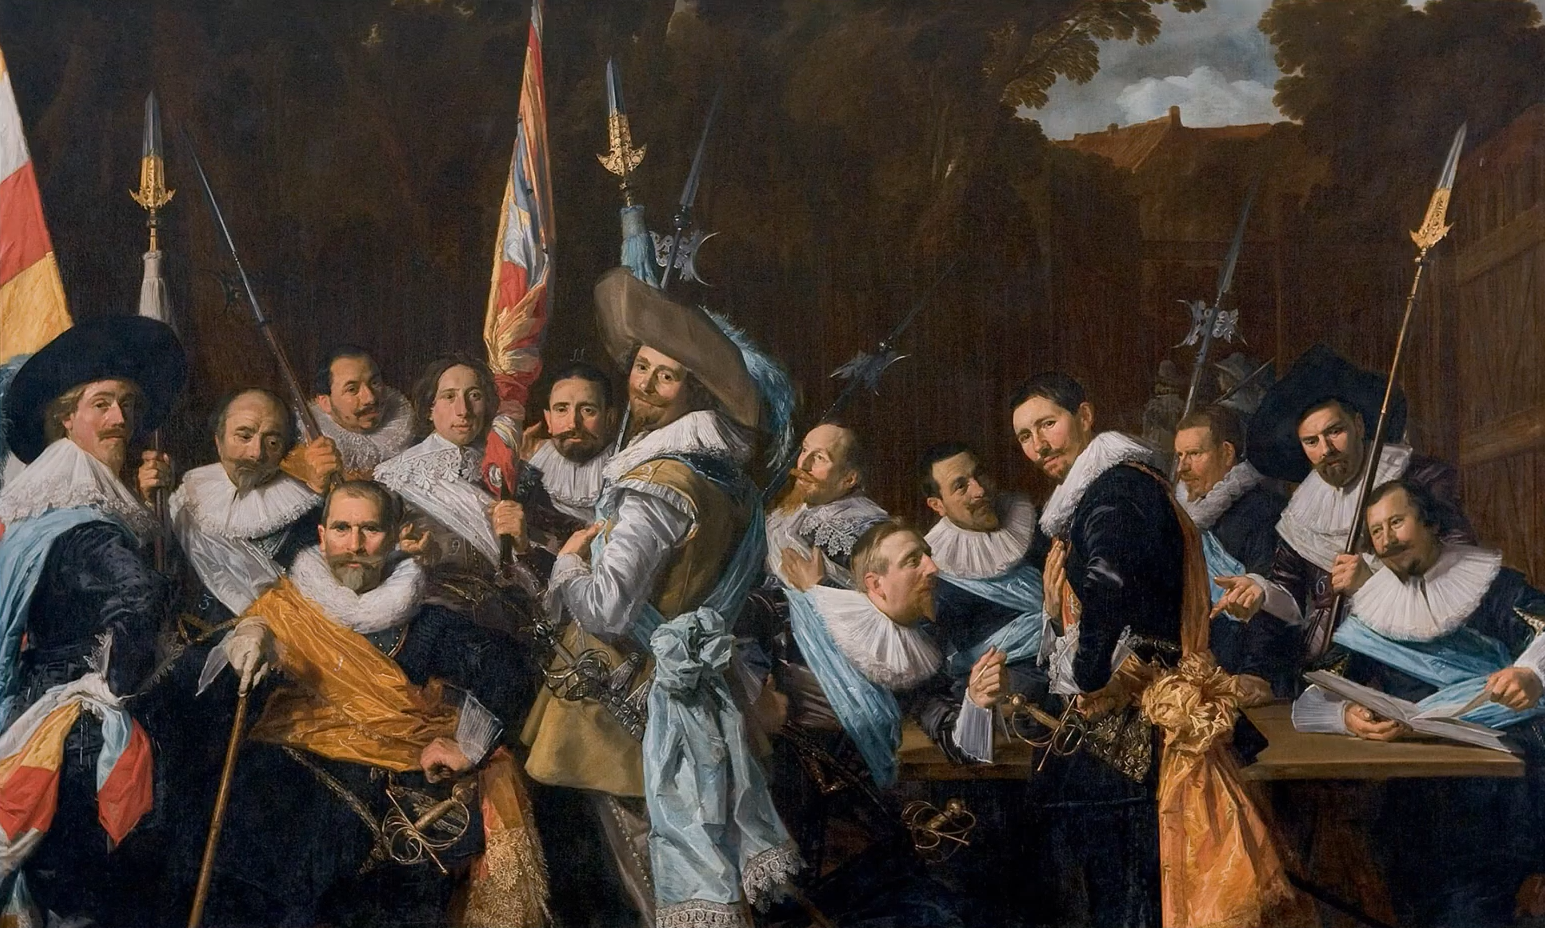 picture of Frans Hals' Archer's of St. Hadrian